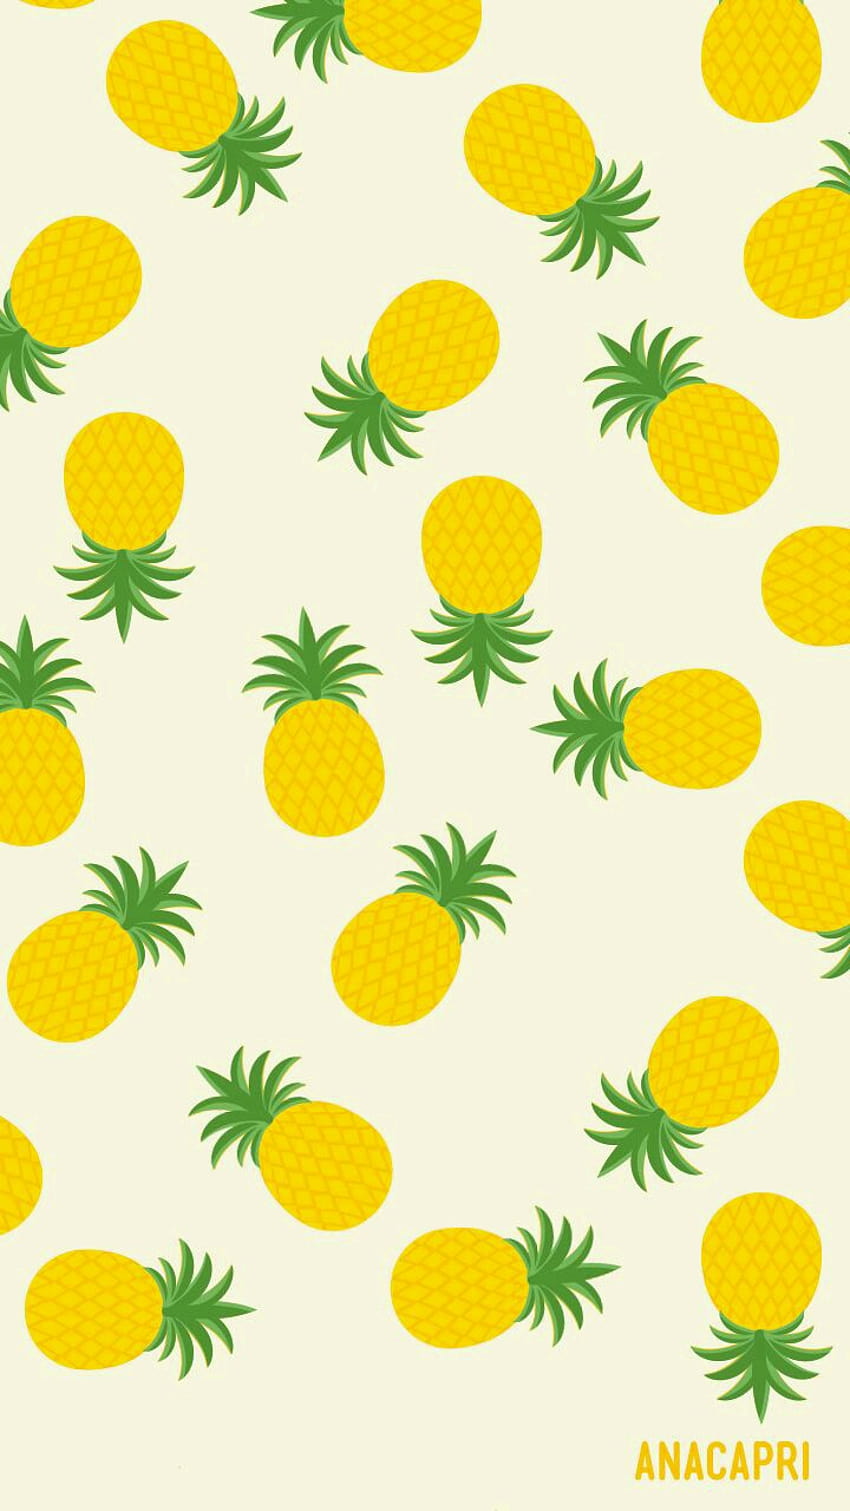 Pineapples shared by amyjames, animated pineapple HD phone wallpaper |  Pxfuel